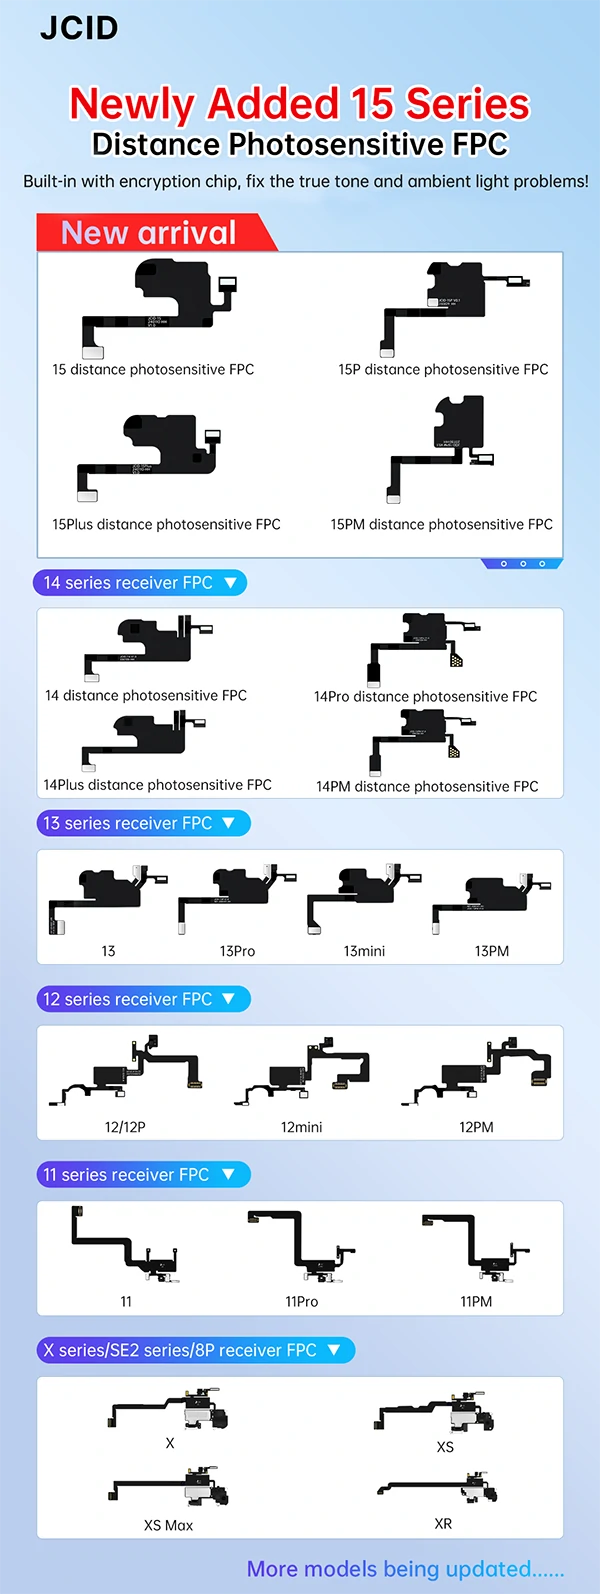 Newly Added 15 Series Distance Photosensitive FPC